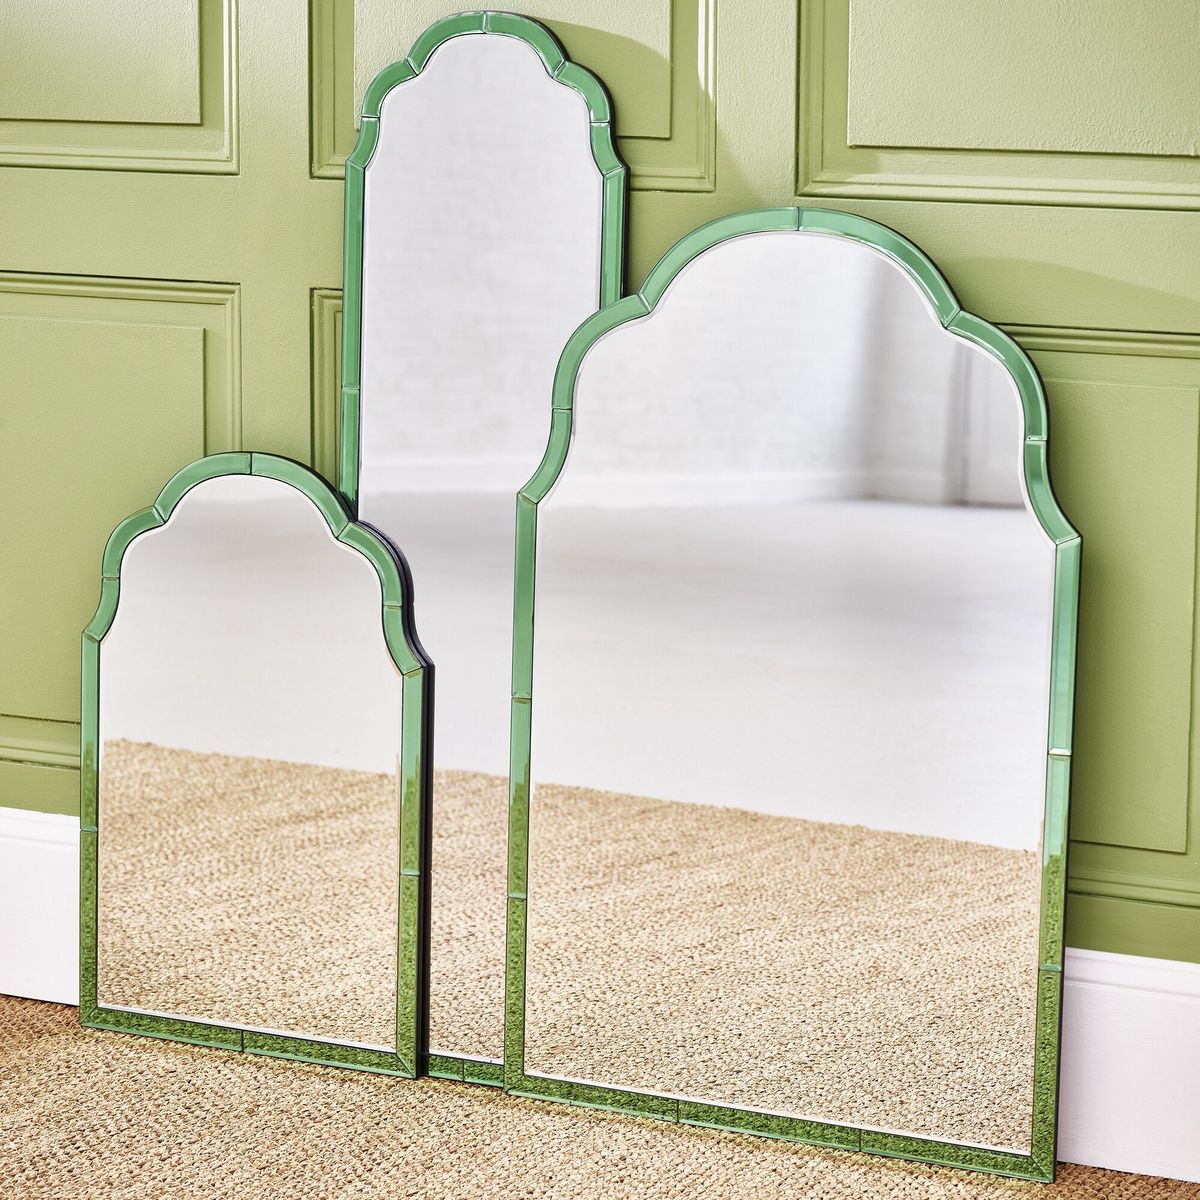  This £10 mirror is the perfect dupe for Oliver Bonas' £125 sellout product 